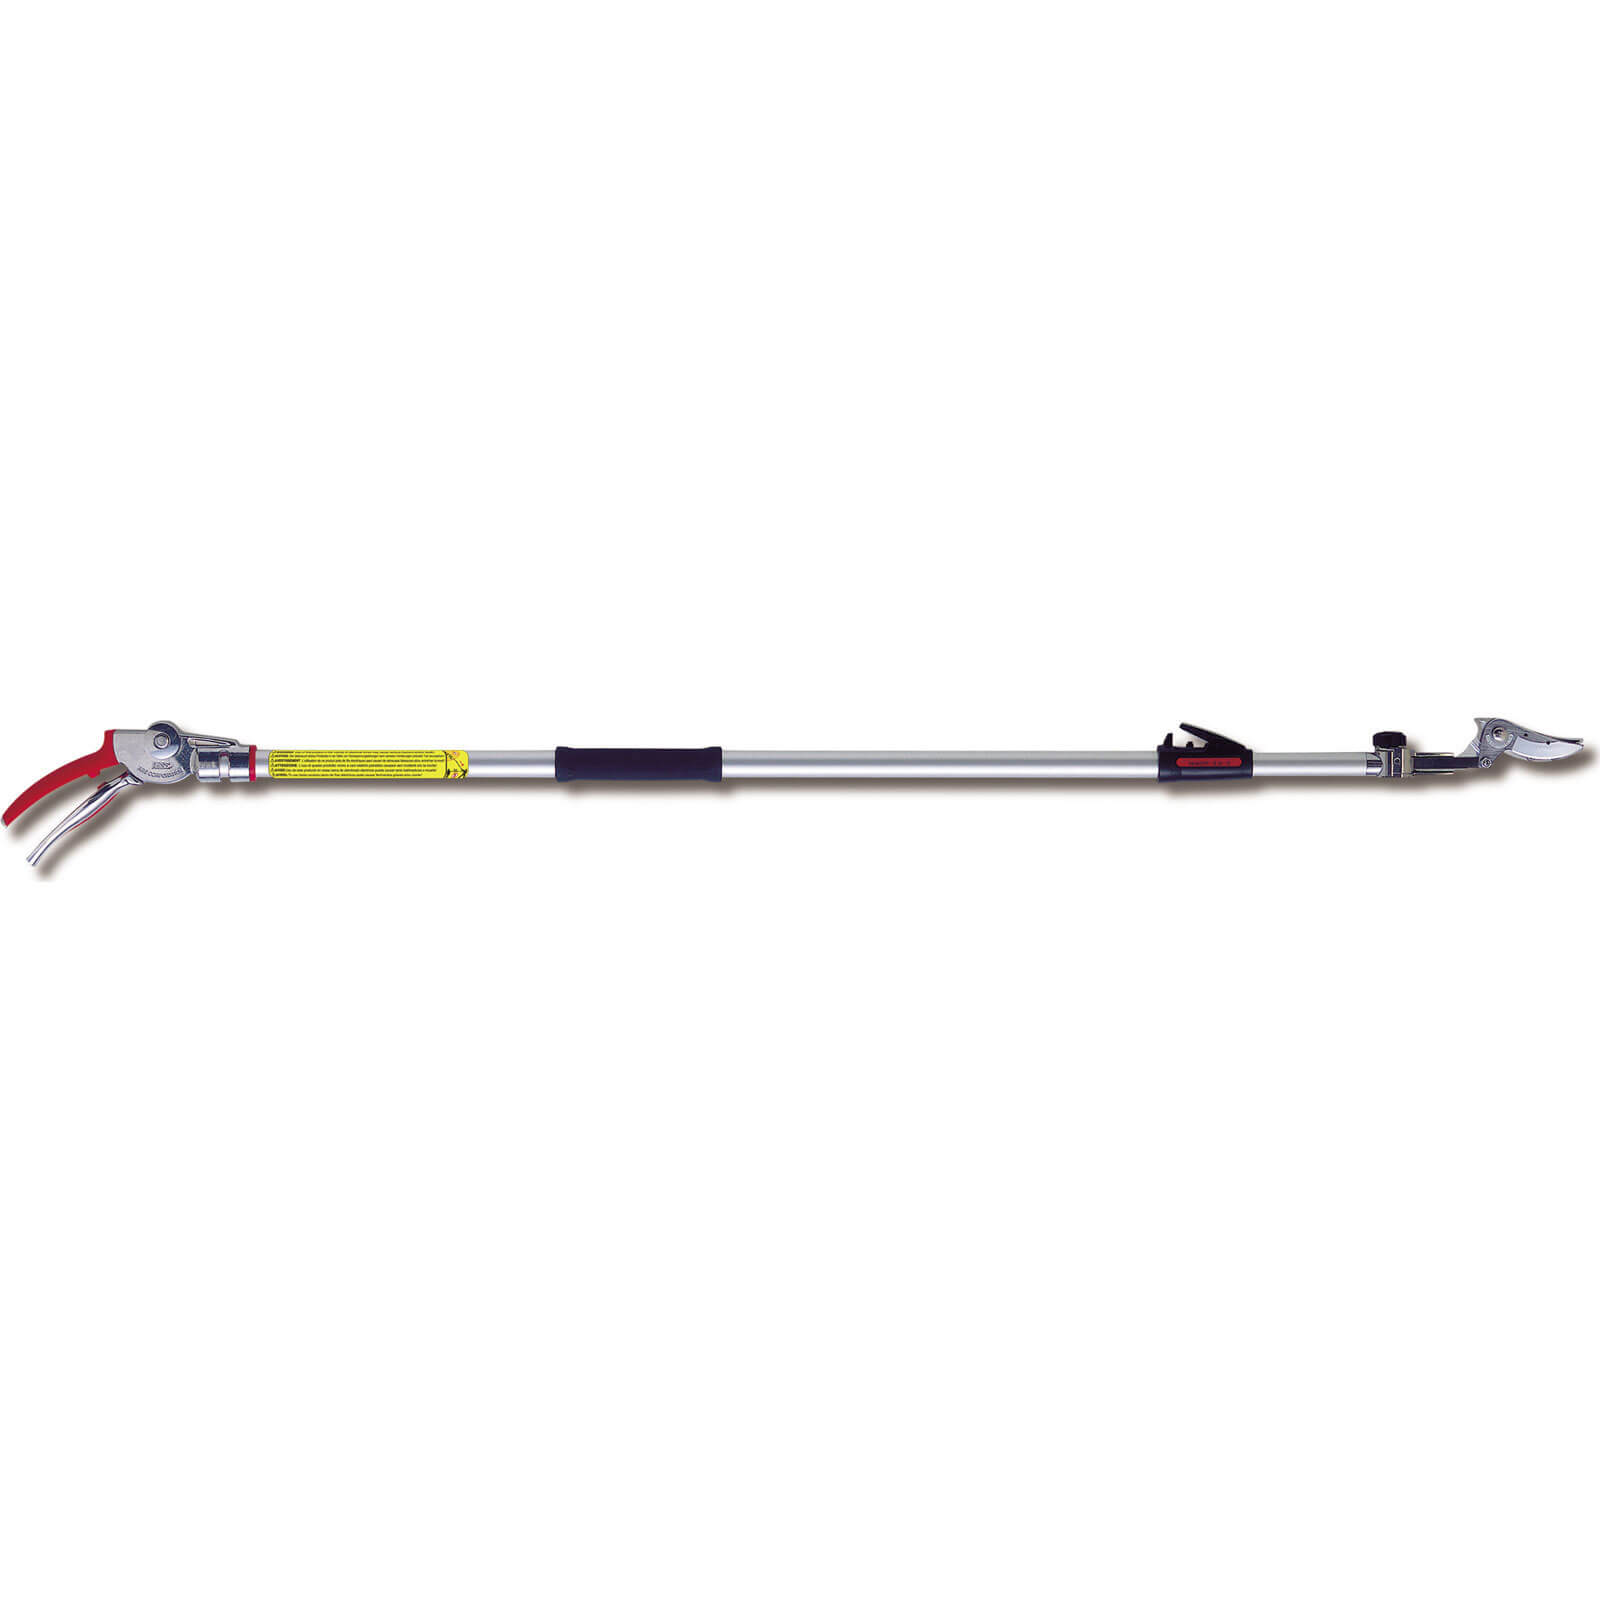 ARS Swing Head Telescopic Bypass Tree Pruner with Small Cut & Hold Blade Extends 1300 - 2000mm